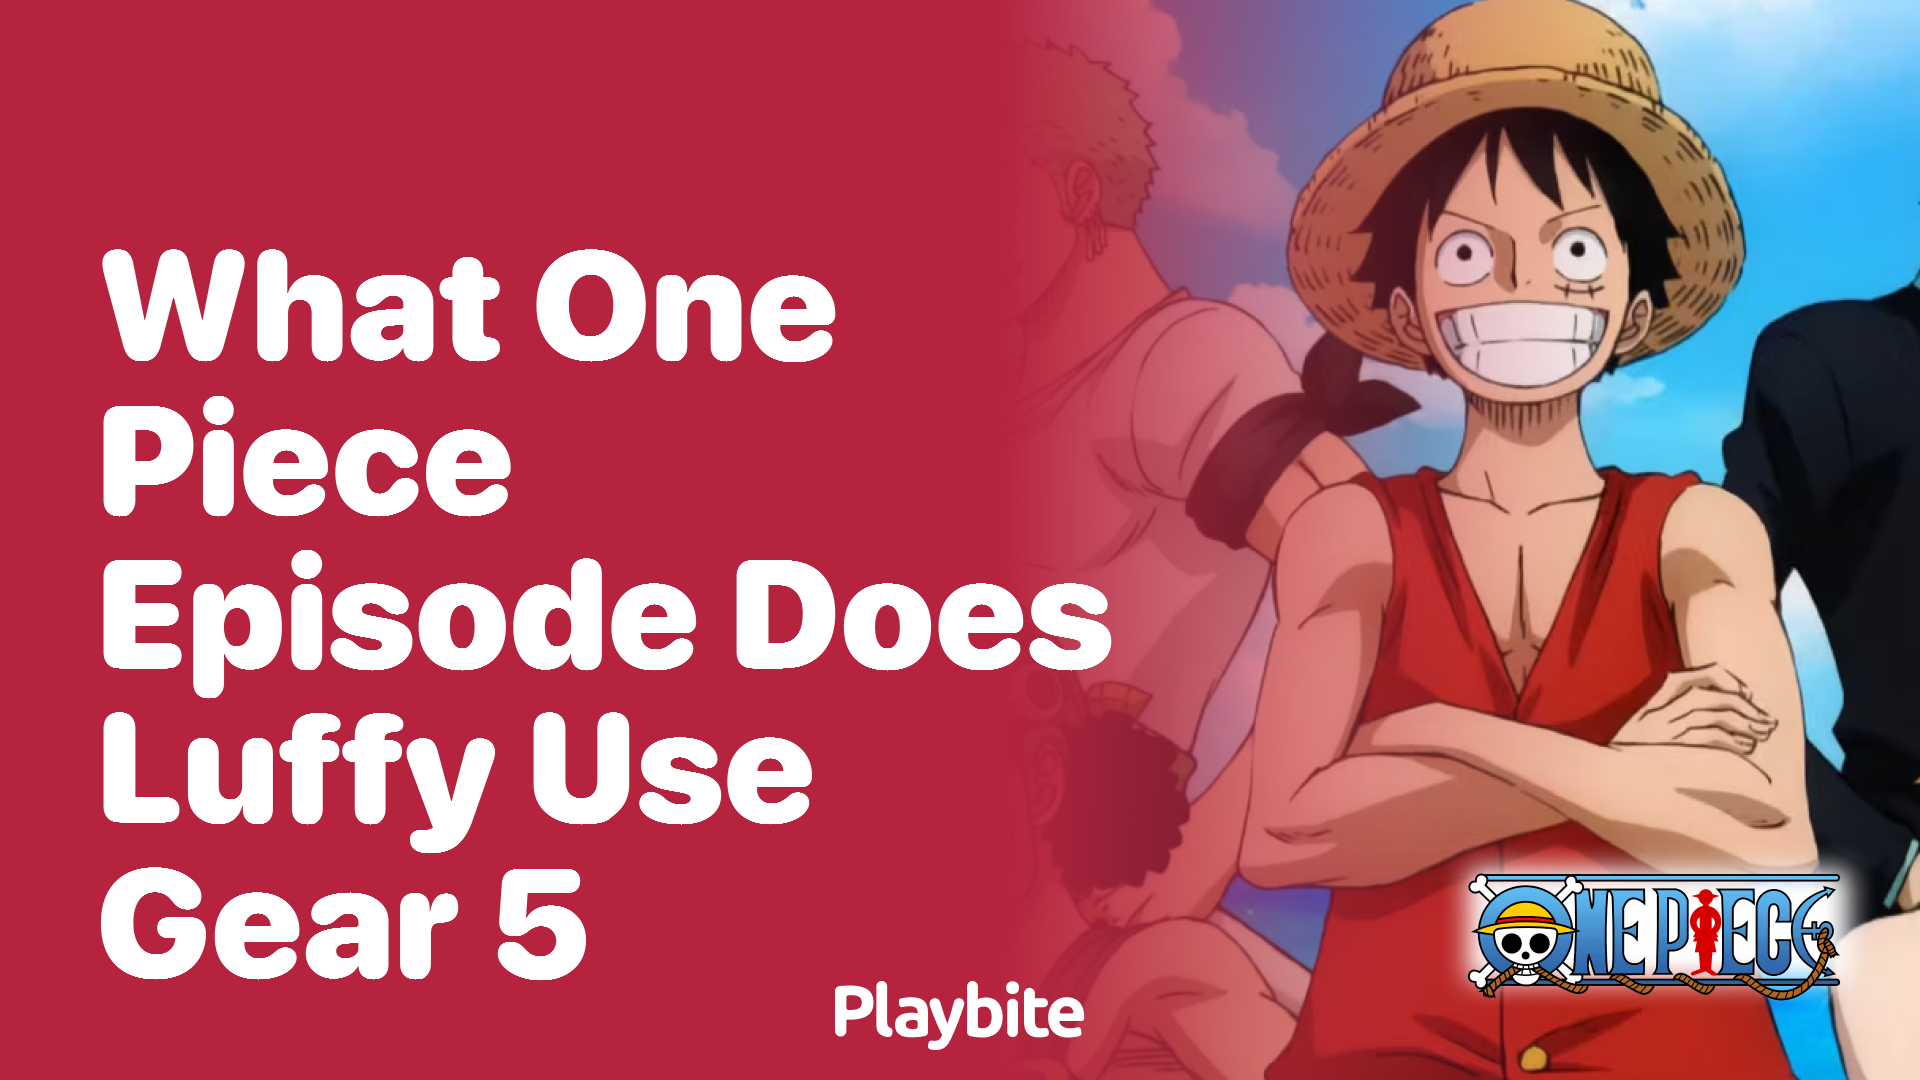 What One Piece episode does Luffy use Gear 5?